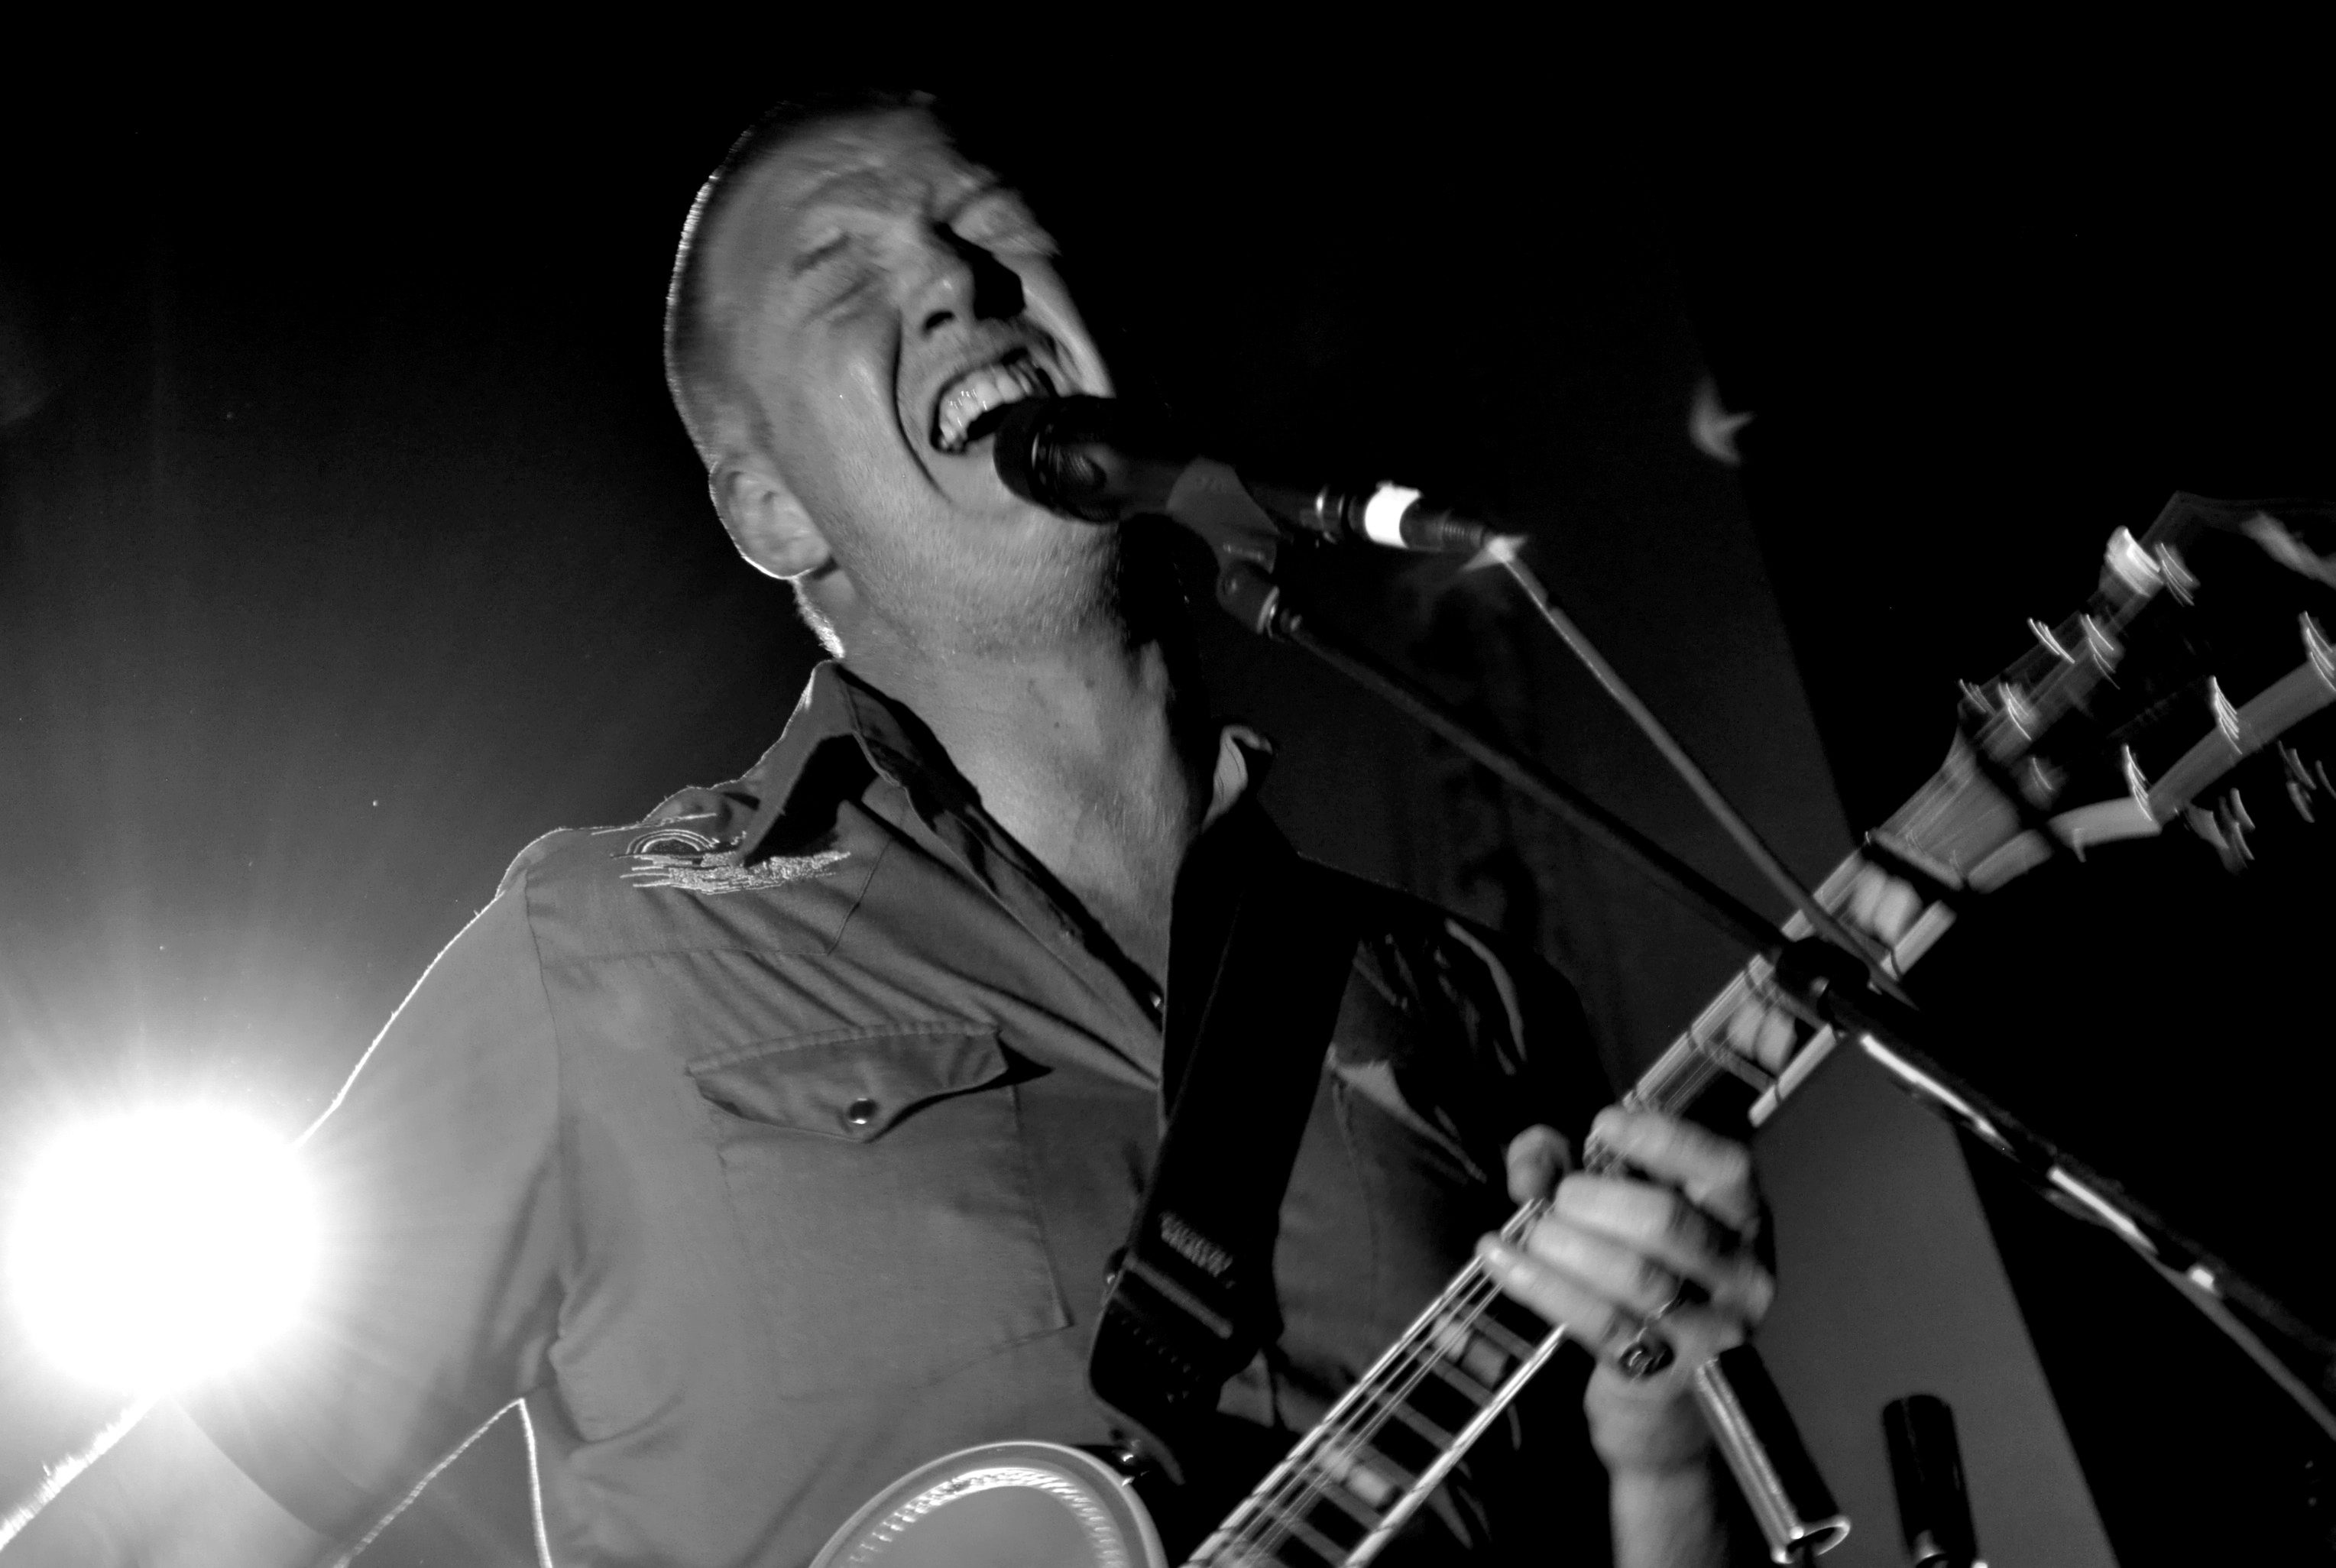 Queens of the Stone Age Finally Release Video for “The Way You Used To Do” Outside of Apple Music Paywall